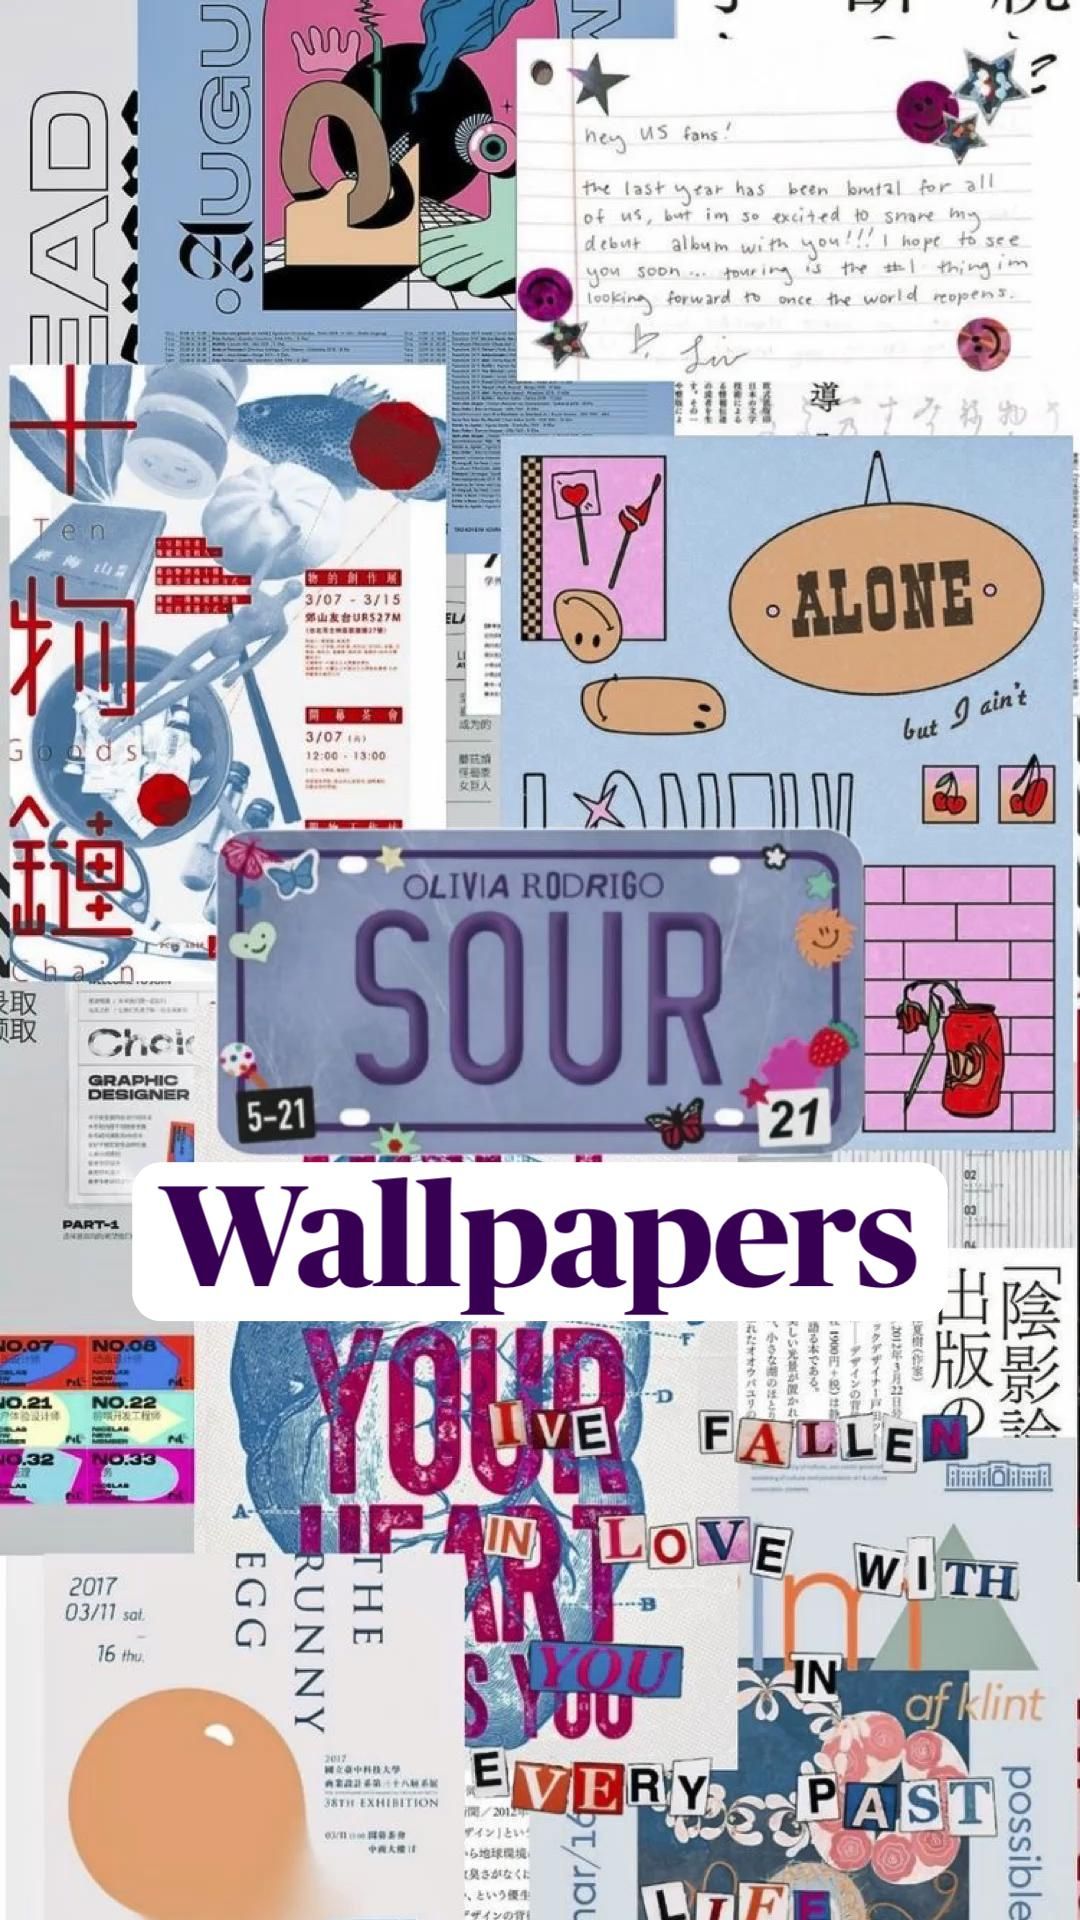 Sour Wallpapers